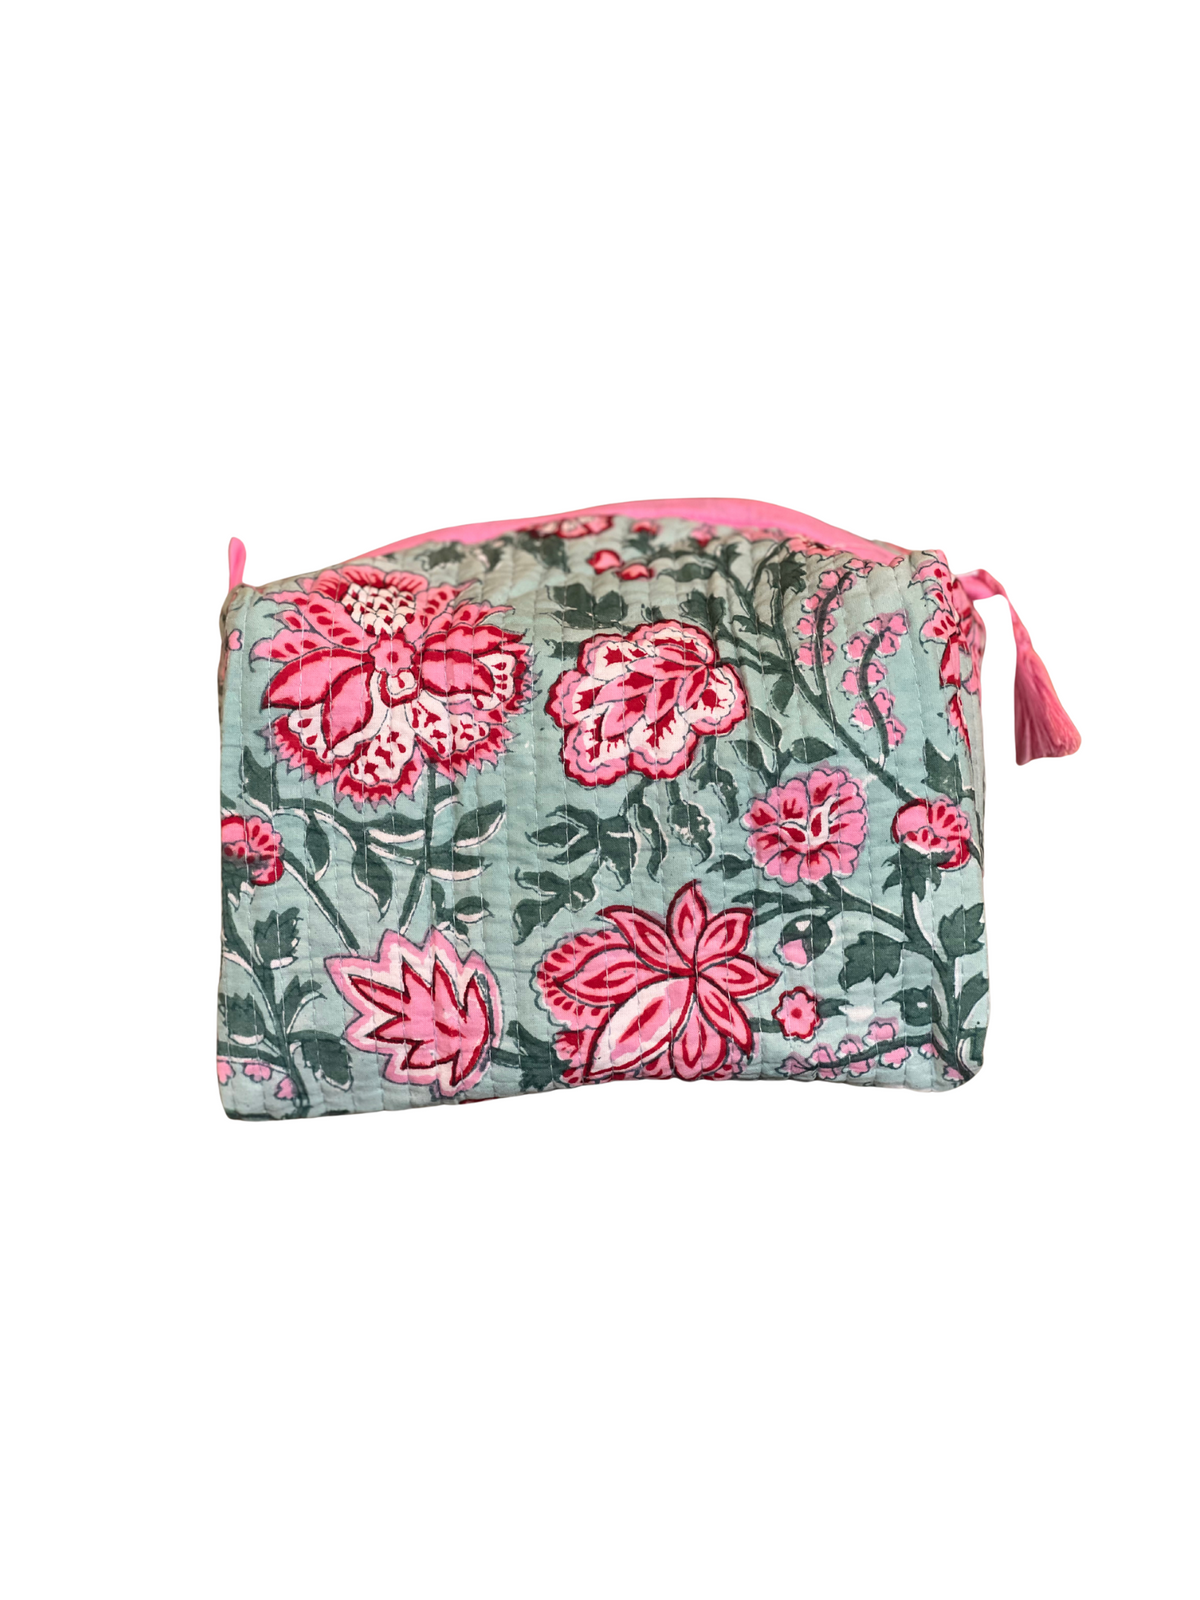 Pink and Green Floral Block Print Cosmetic Bag Small